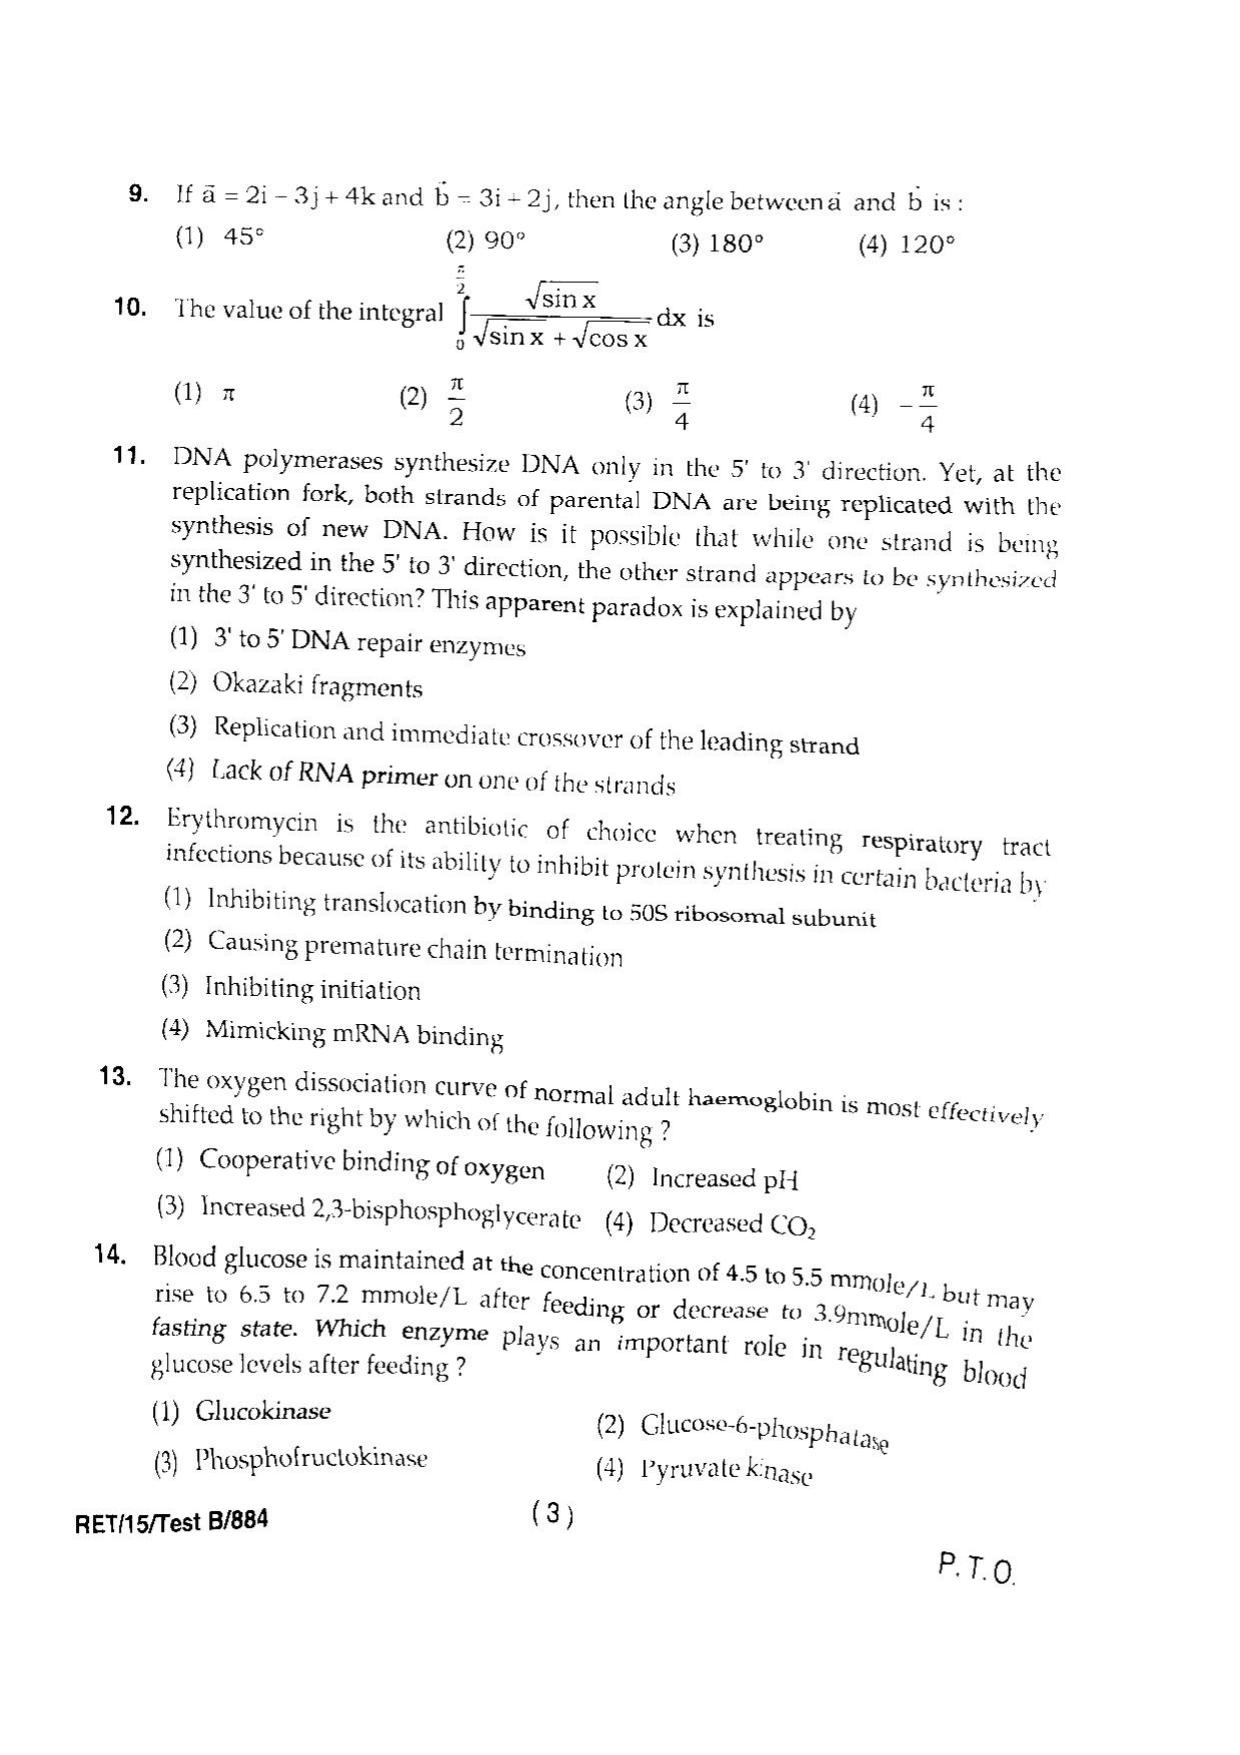 BHU RET ZOOLOGY 2015 Question Paper - Page 5